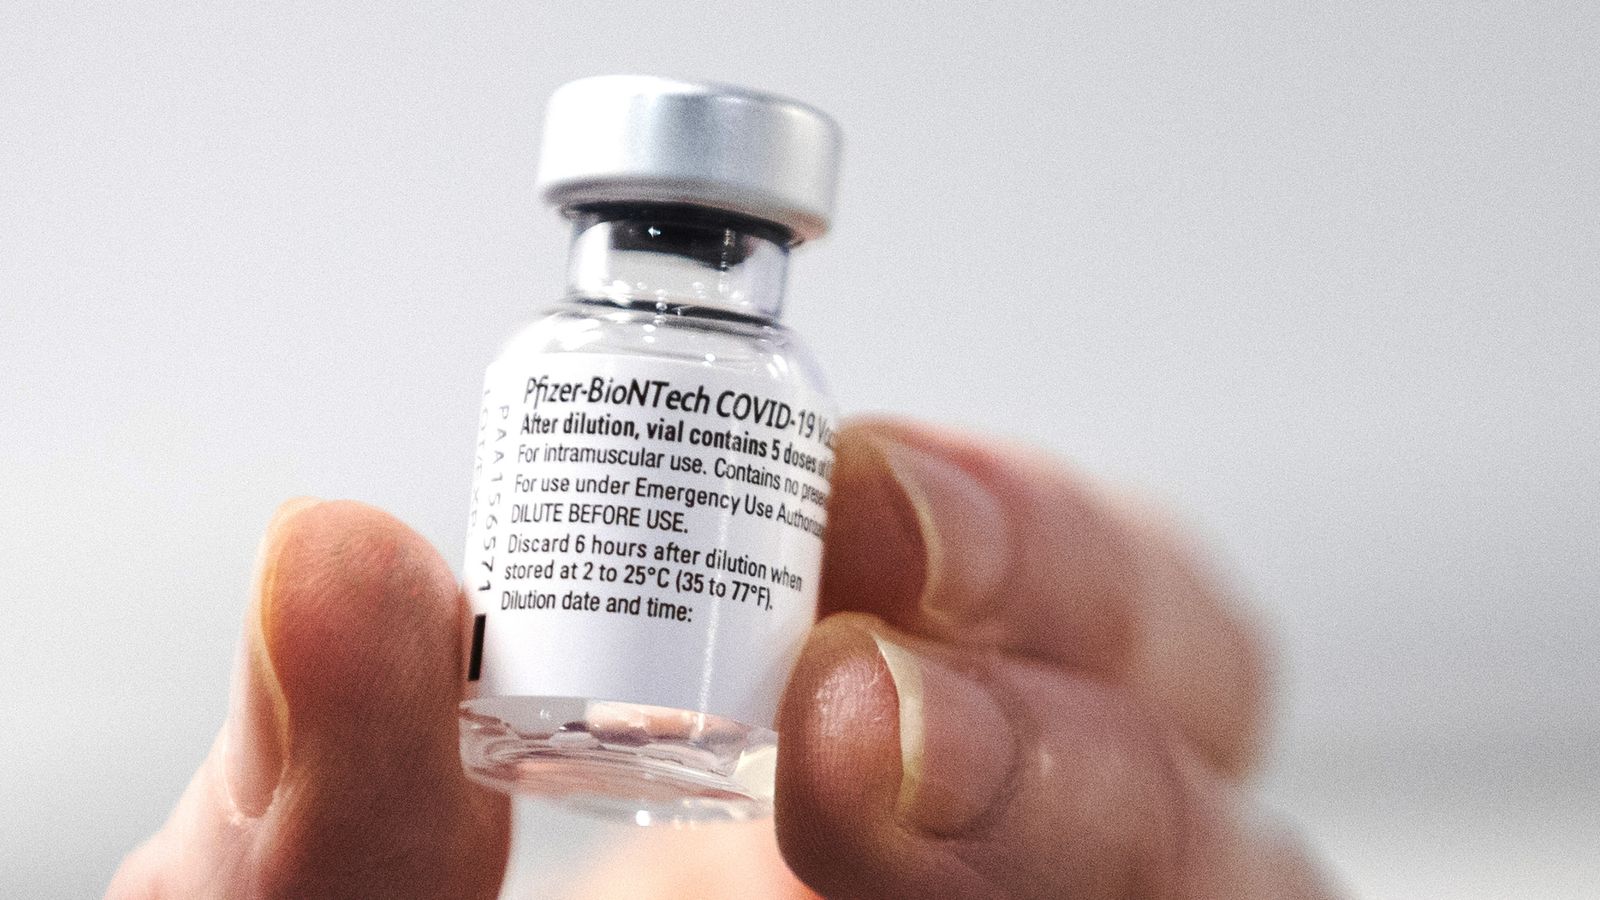 Pfizer sees revenues double to $81bn thanks to COVID-19 vaccine